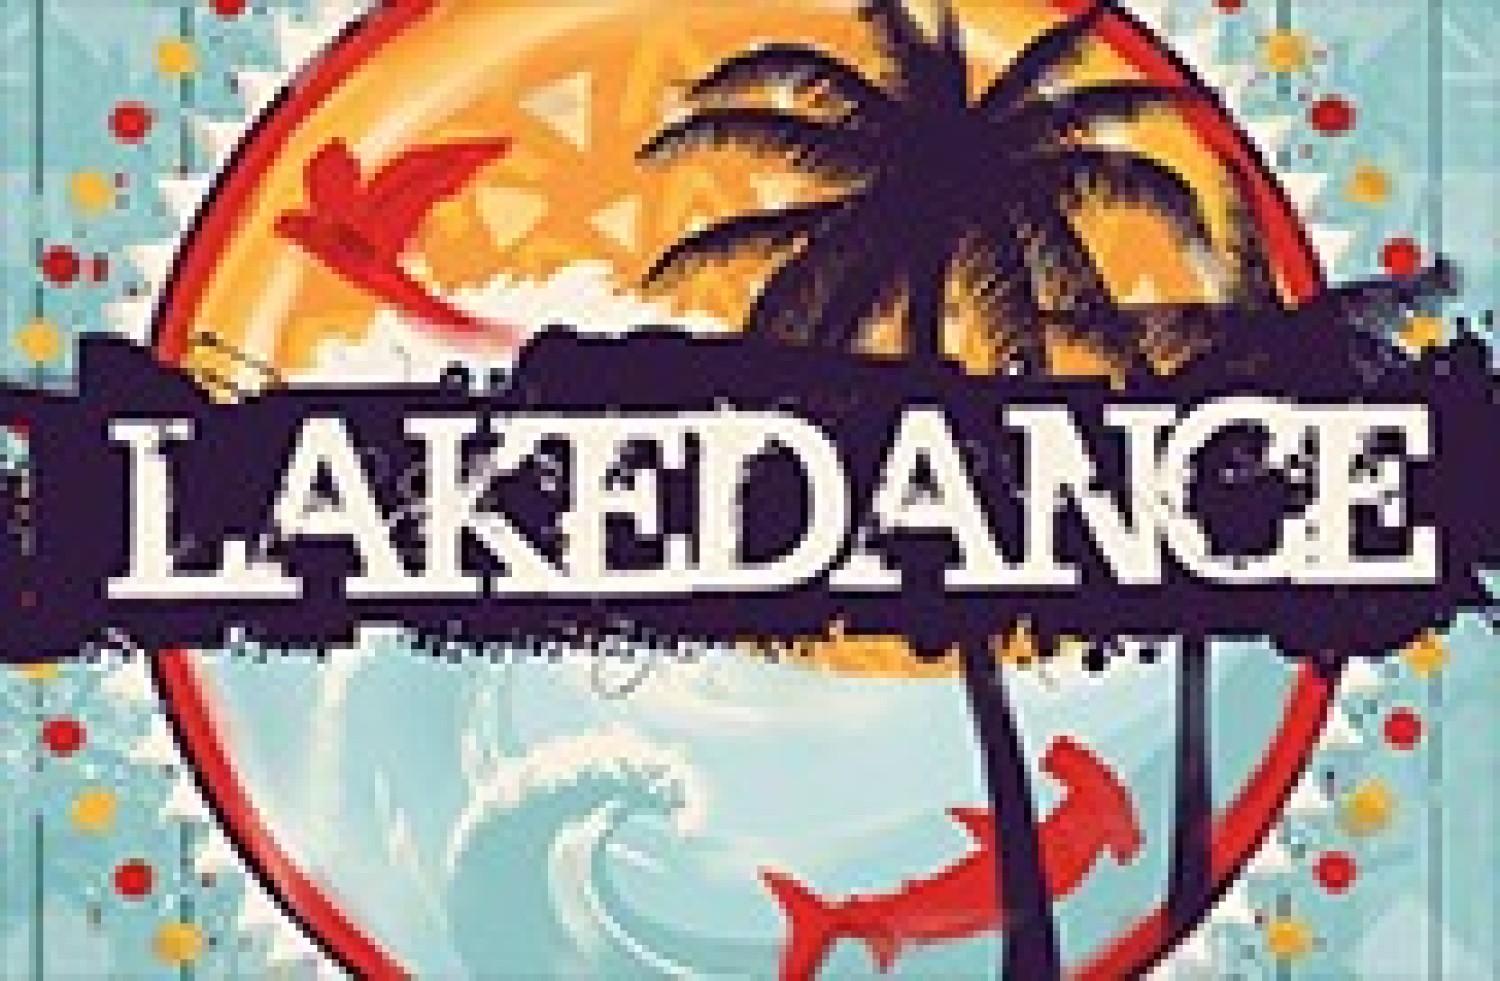 Party report: Lakedance, Best (13-08-2016)